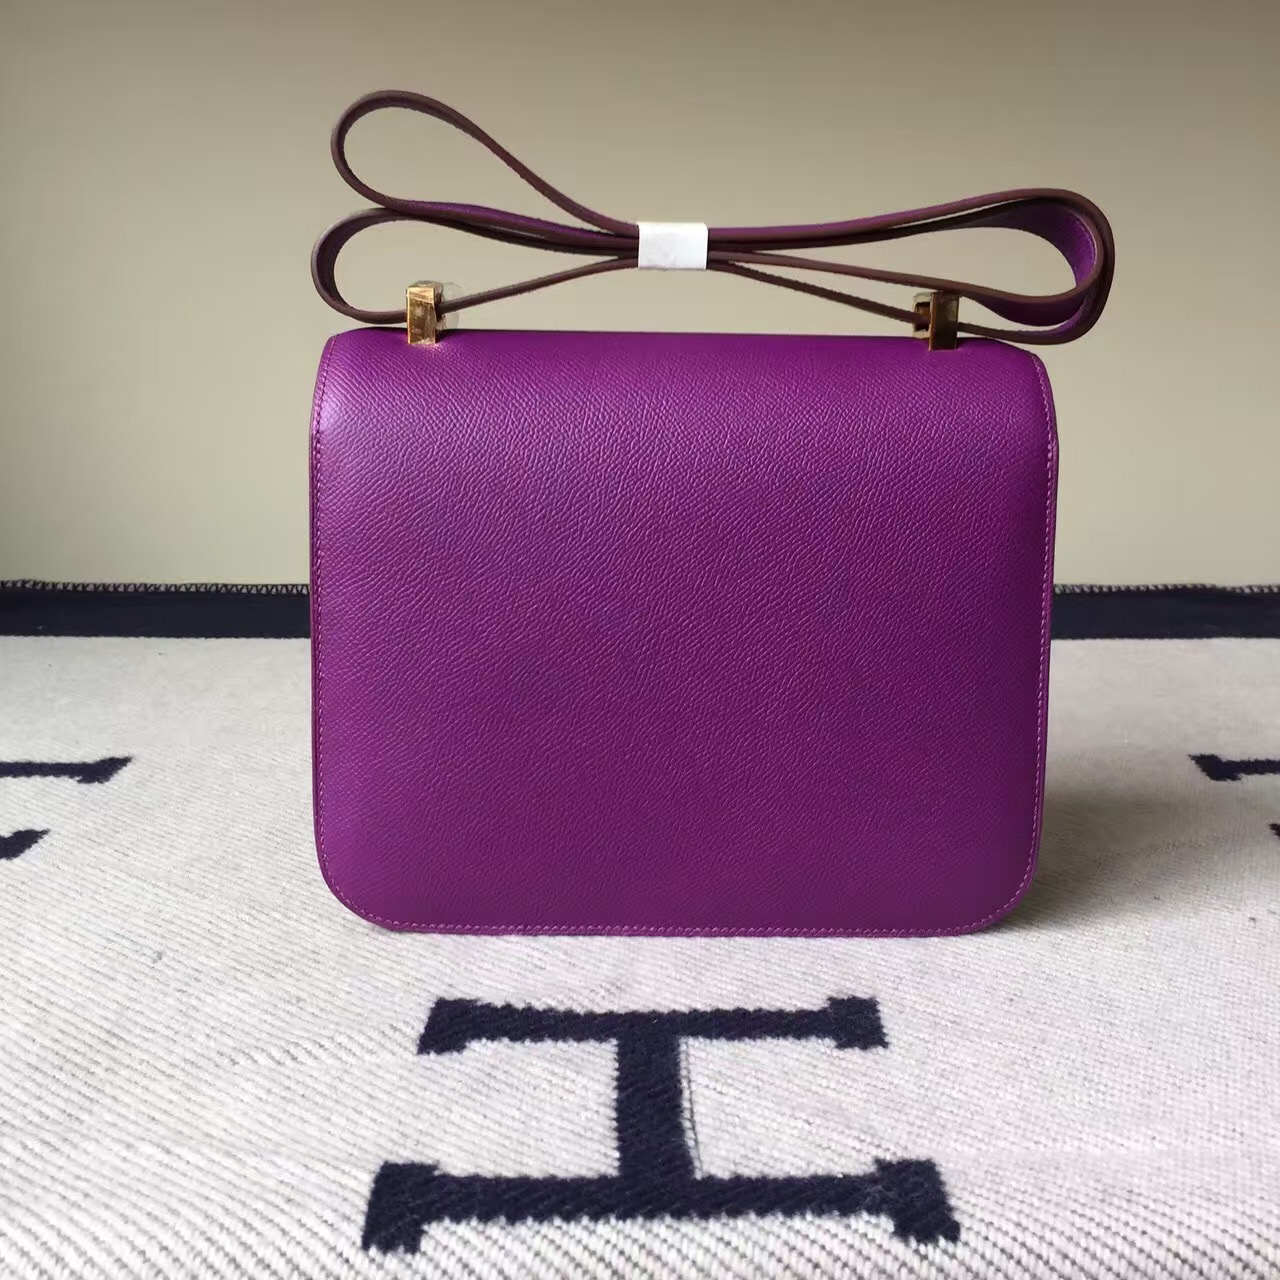 New Fashion Hermes Epsom Leather Constance Bag in P9 Anemone Purple